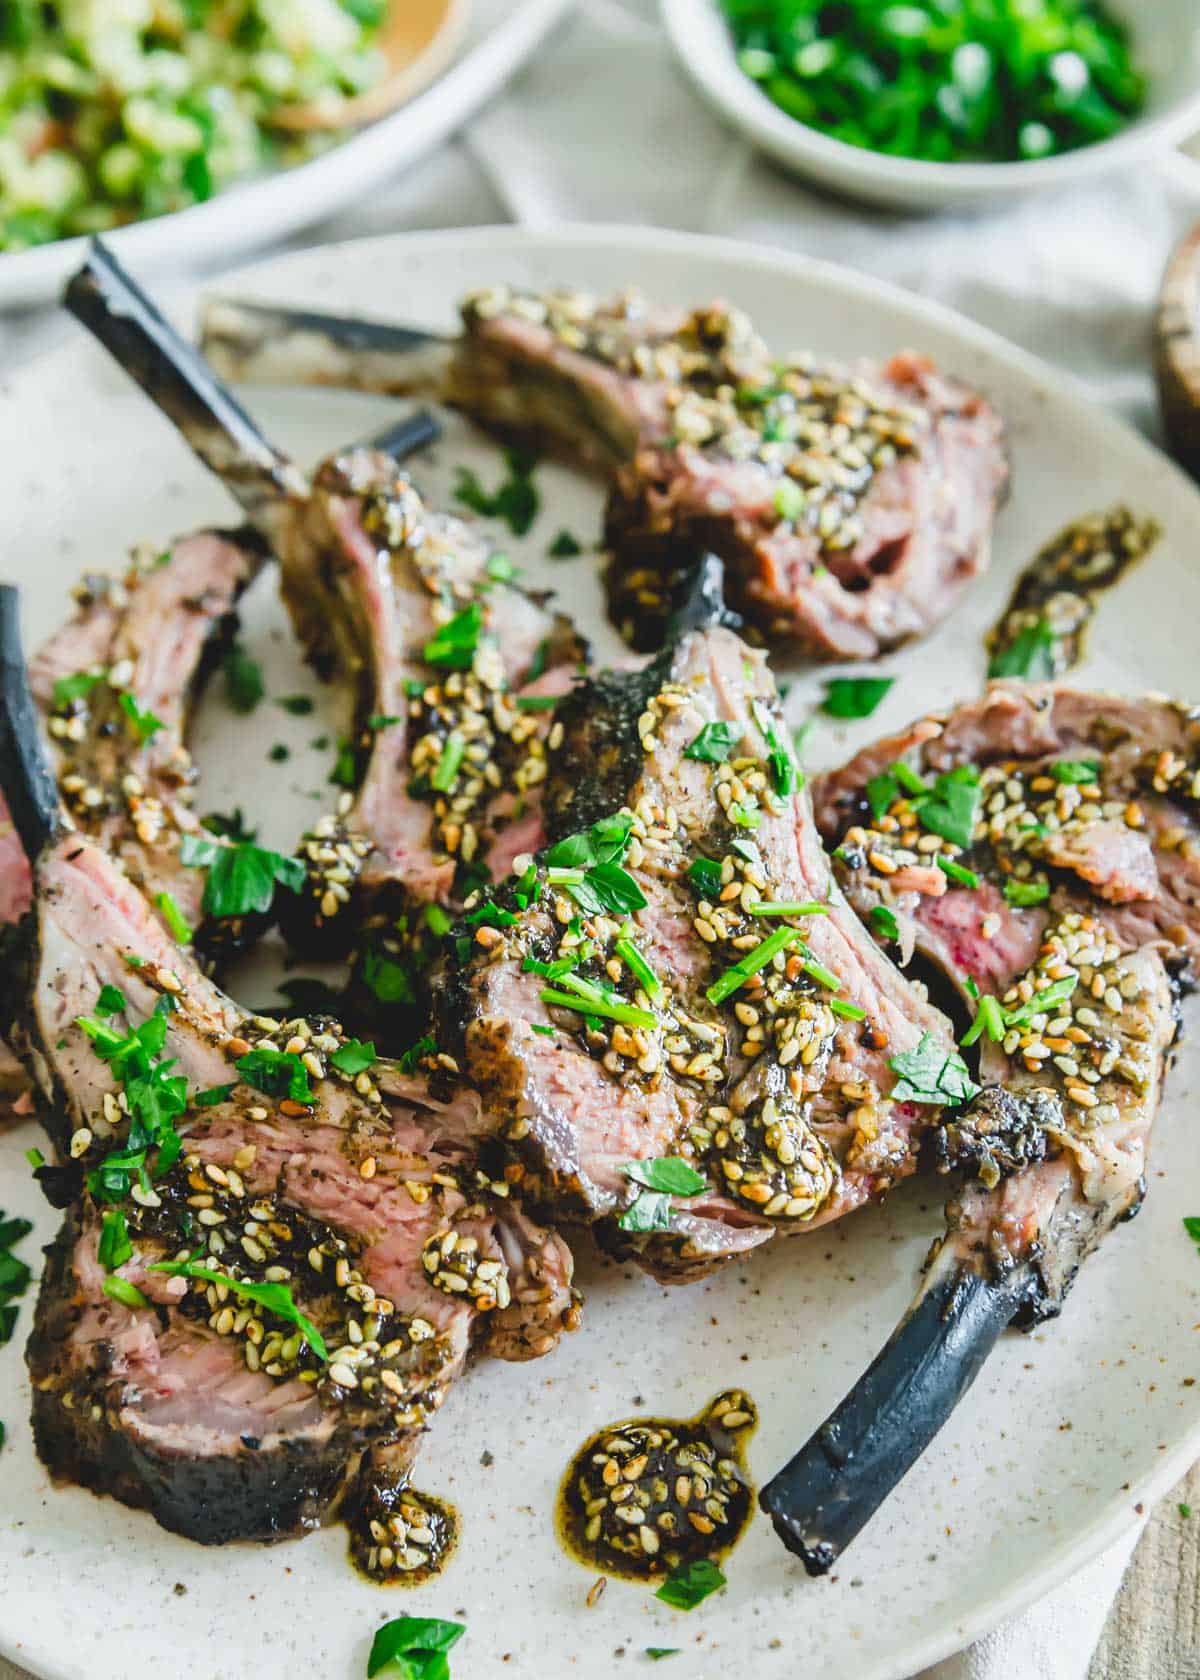 Za'atar grilled rack of lamb garnished with fresh parsley on a plate.